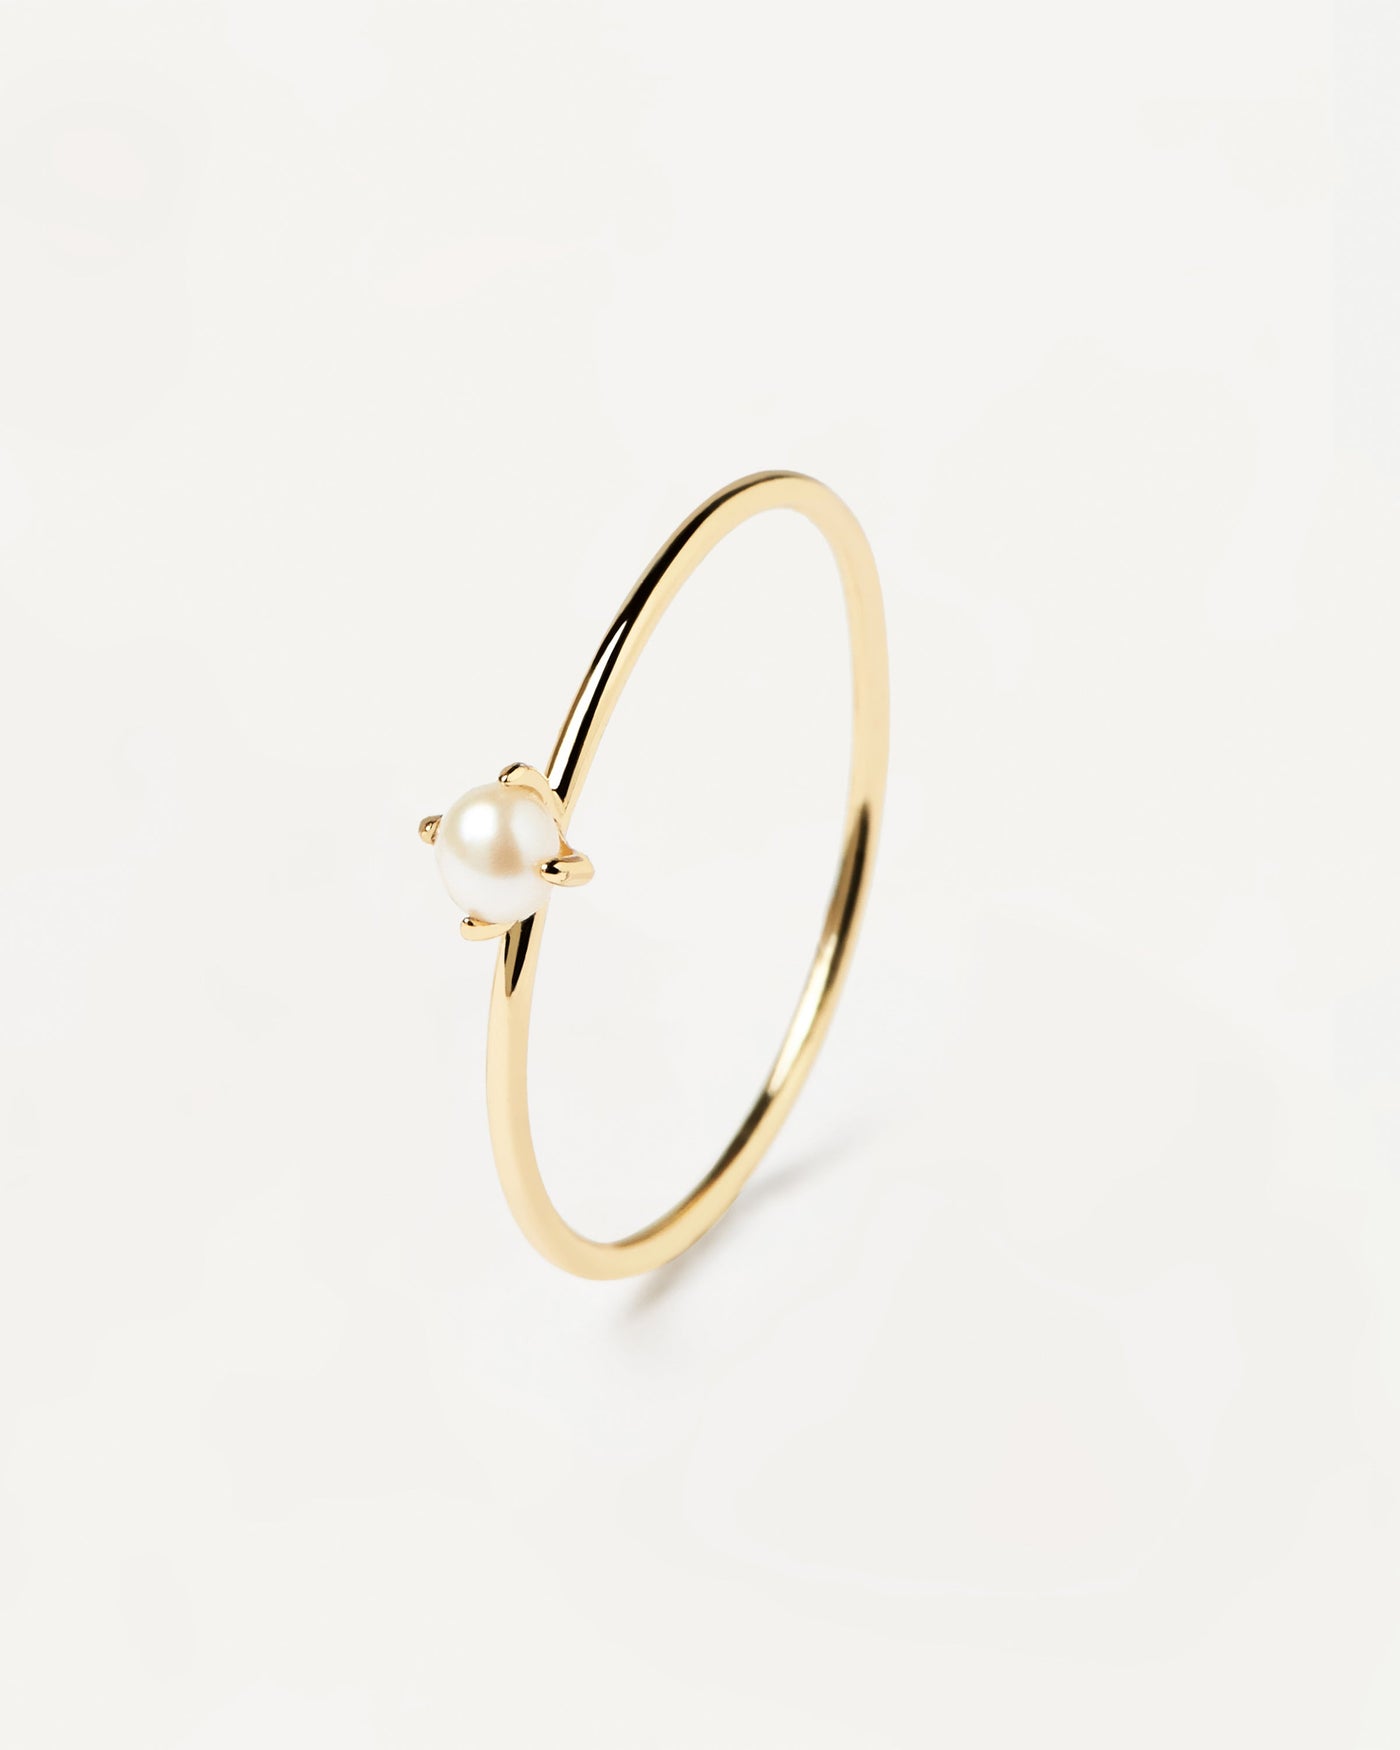 Pearl ring in 14k yellow gold | KLENOTA